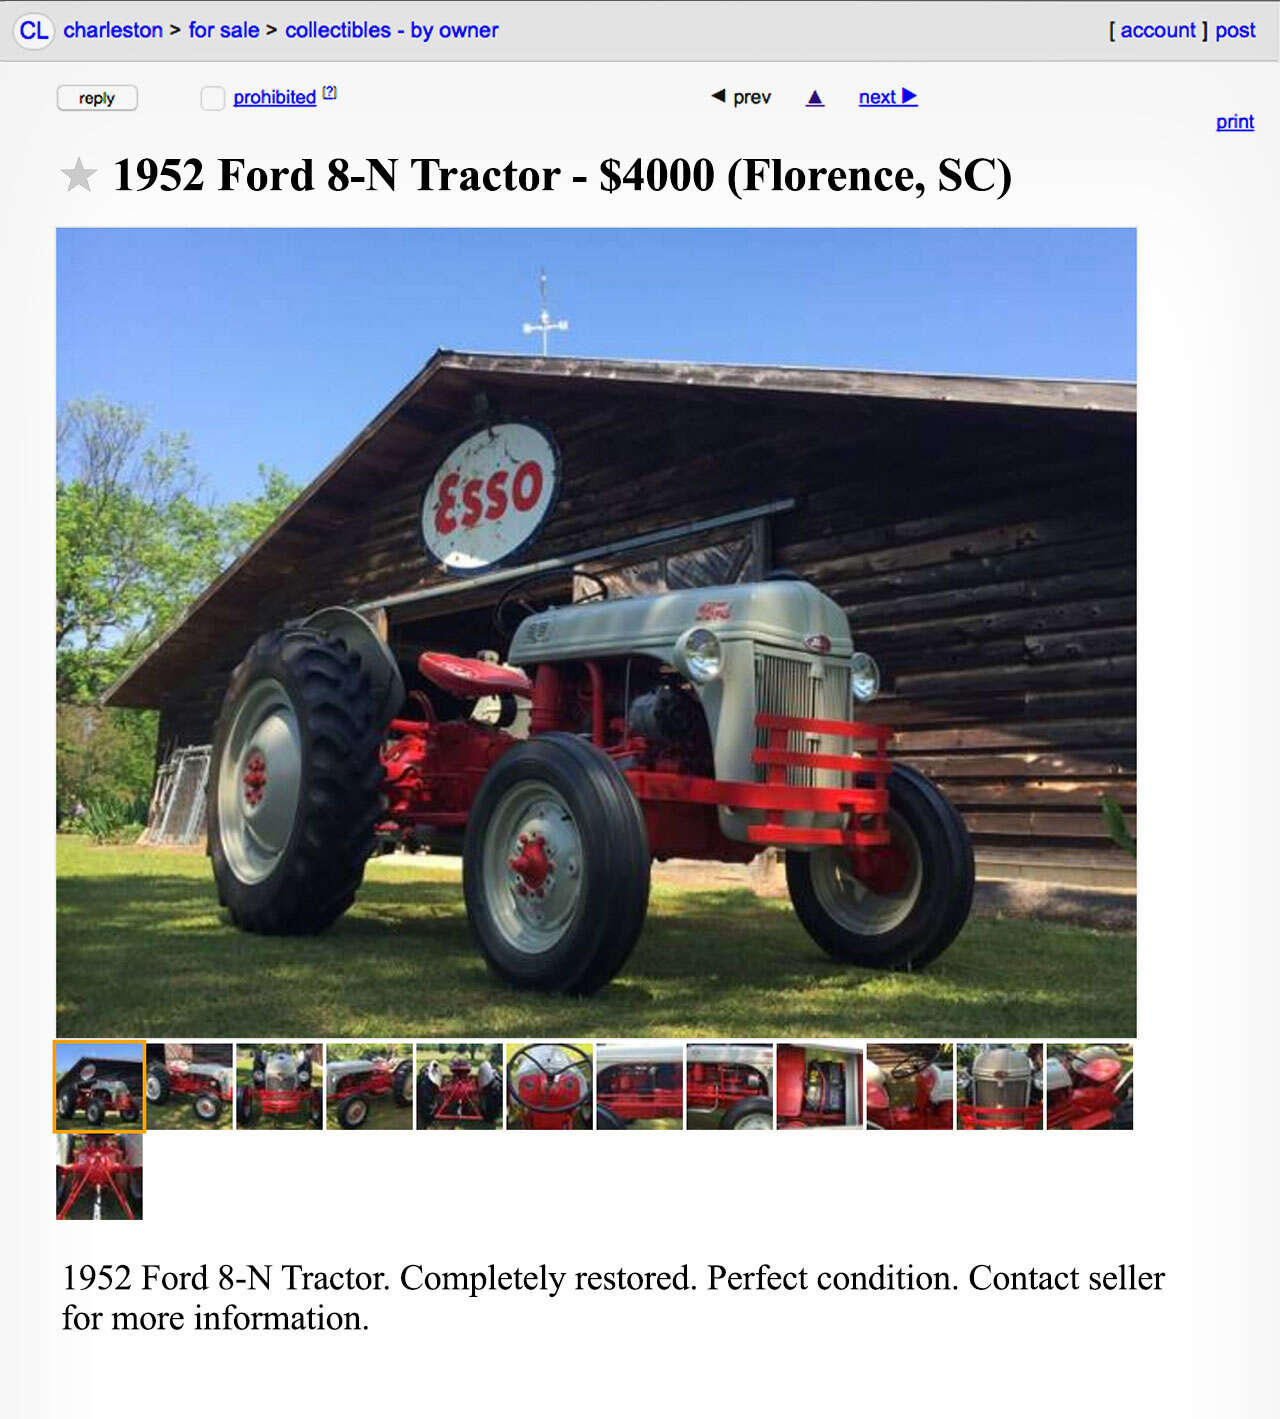 A Craigslist advertisement for an antique tractor. 